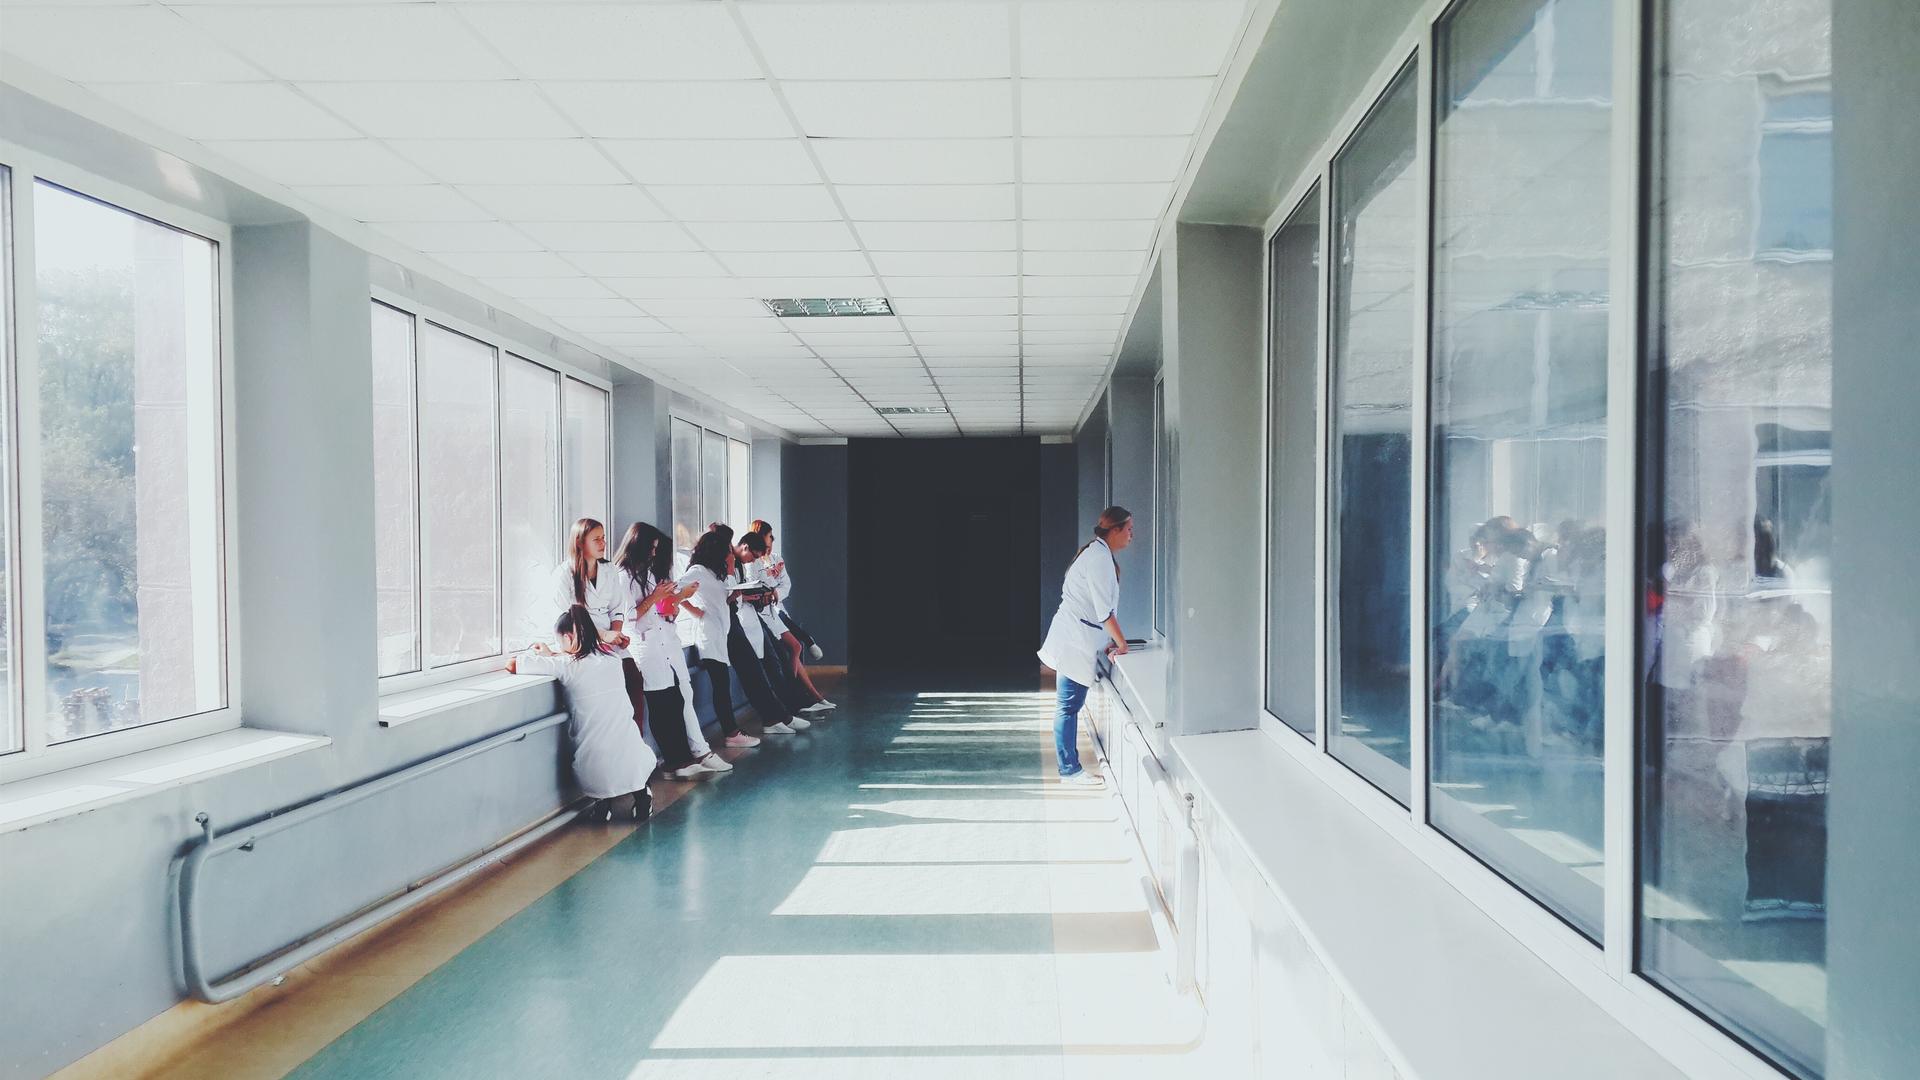 Hospital workers in a hallway